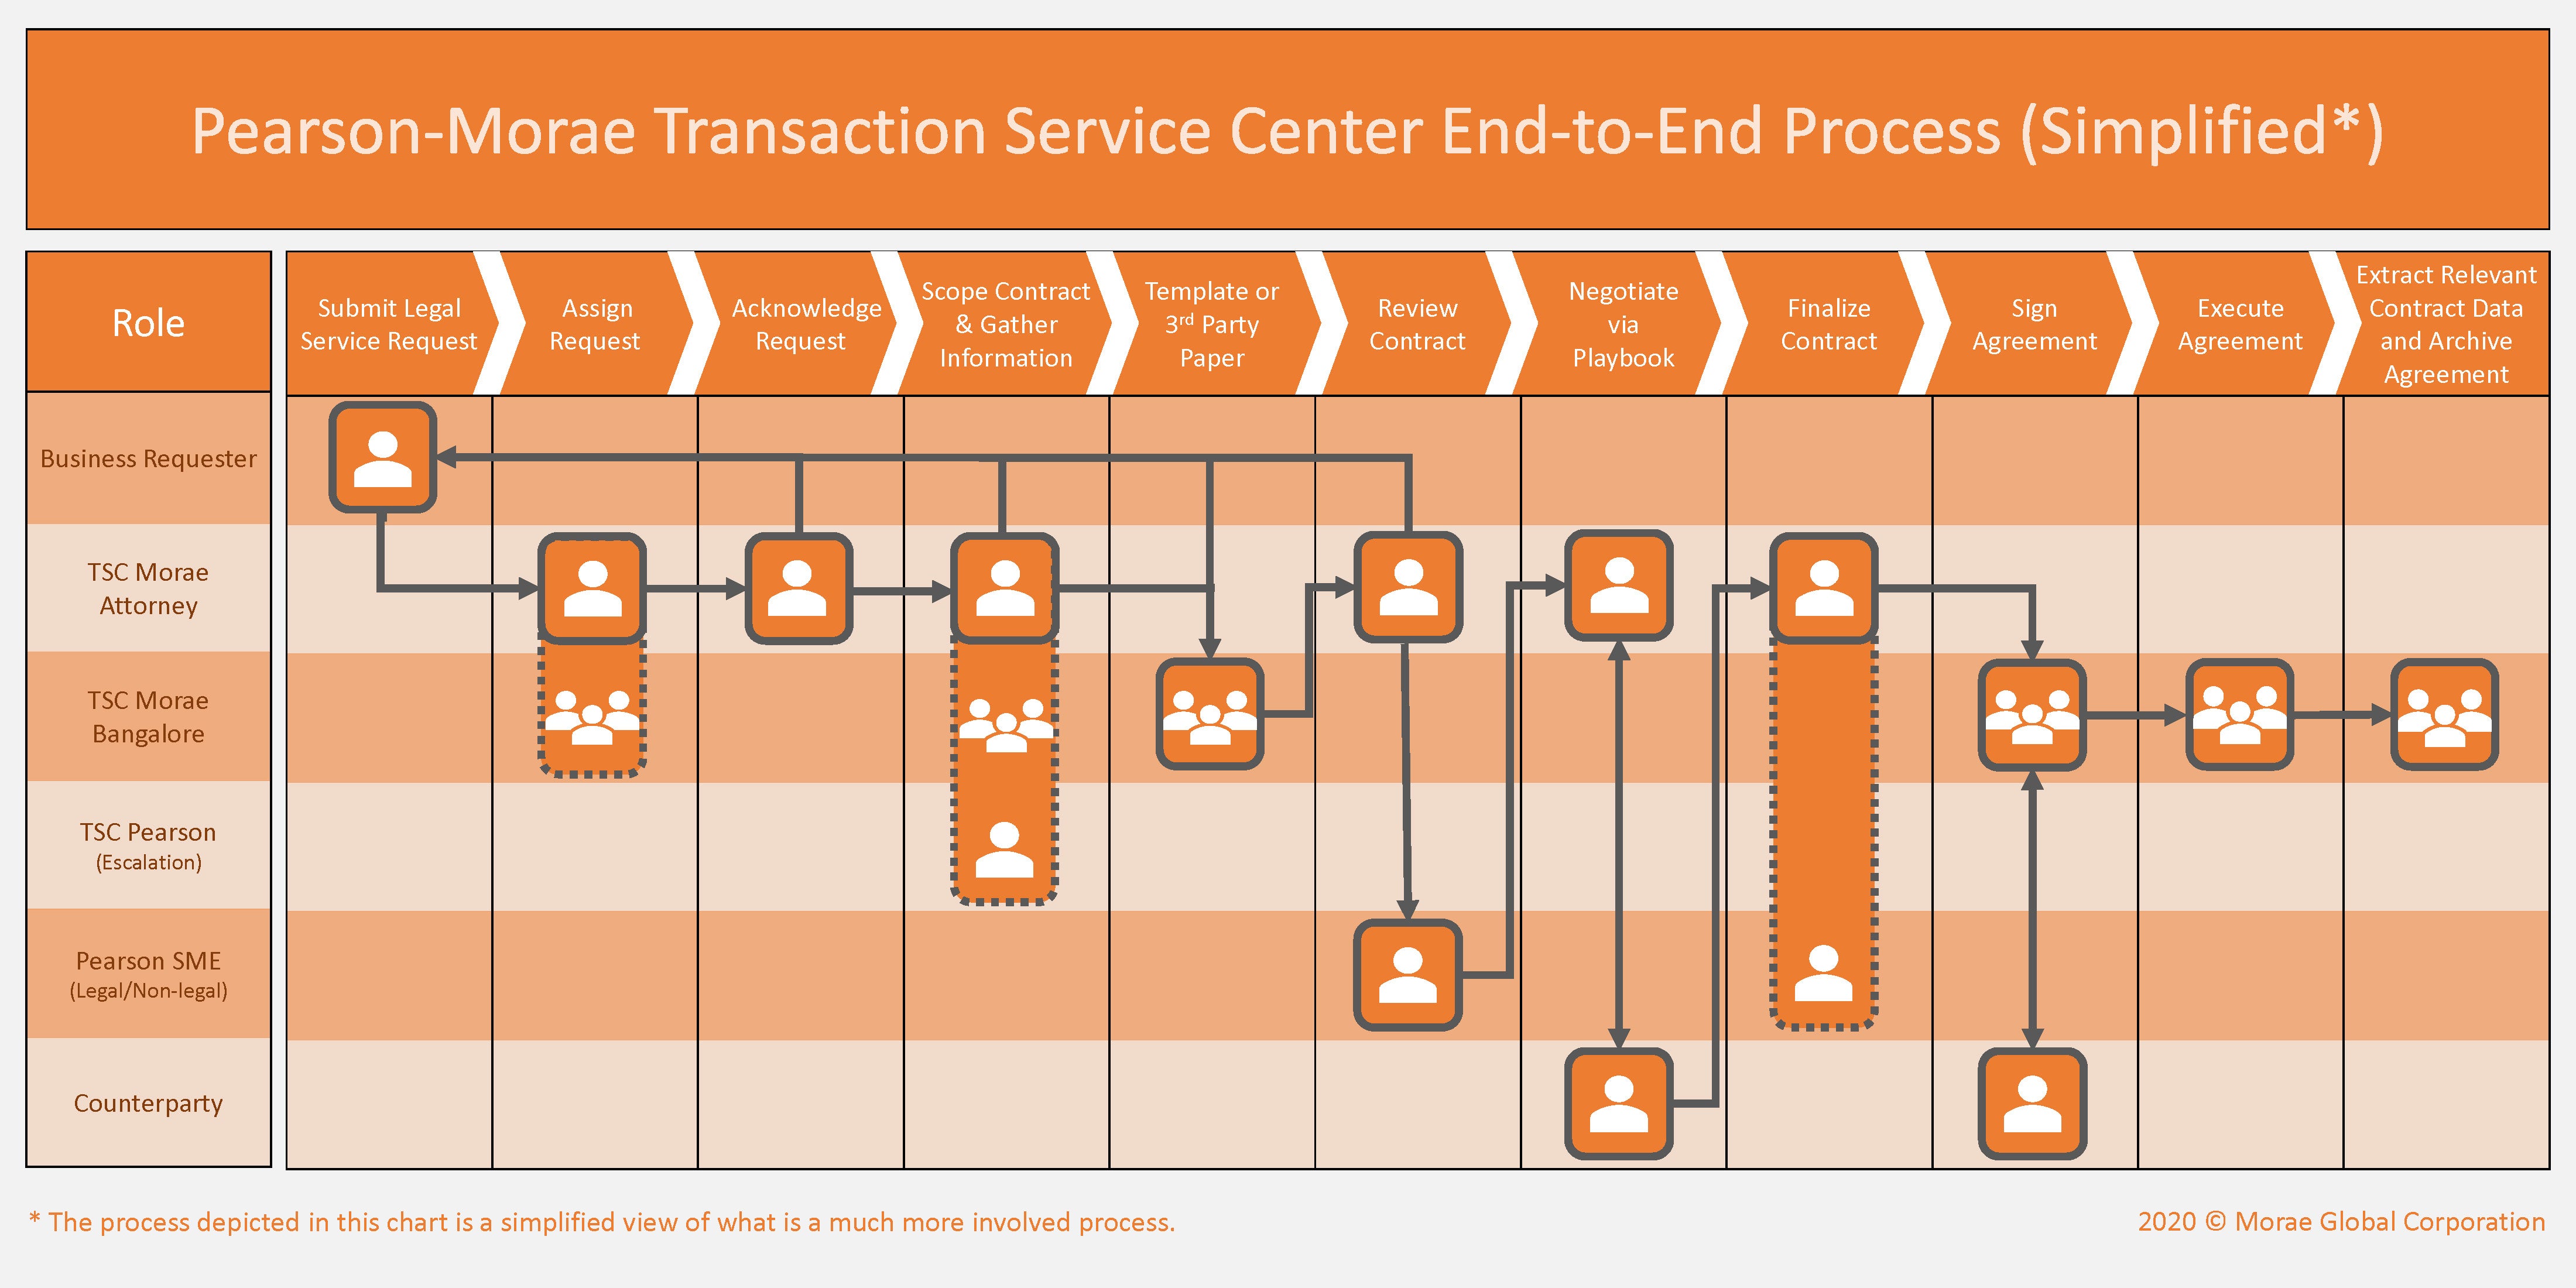 Service Center End-to-End Process (Simplified*)